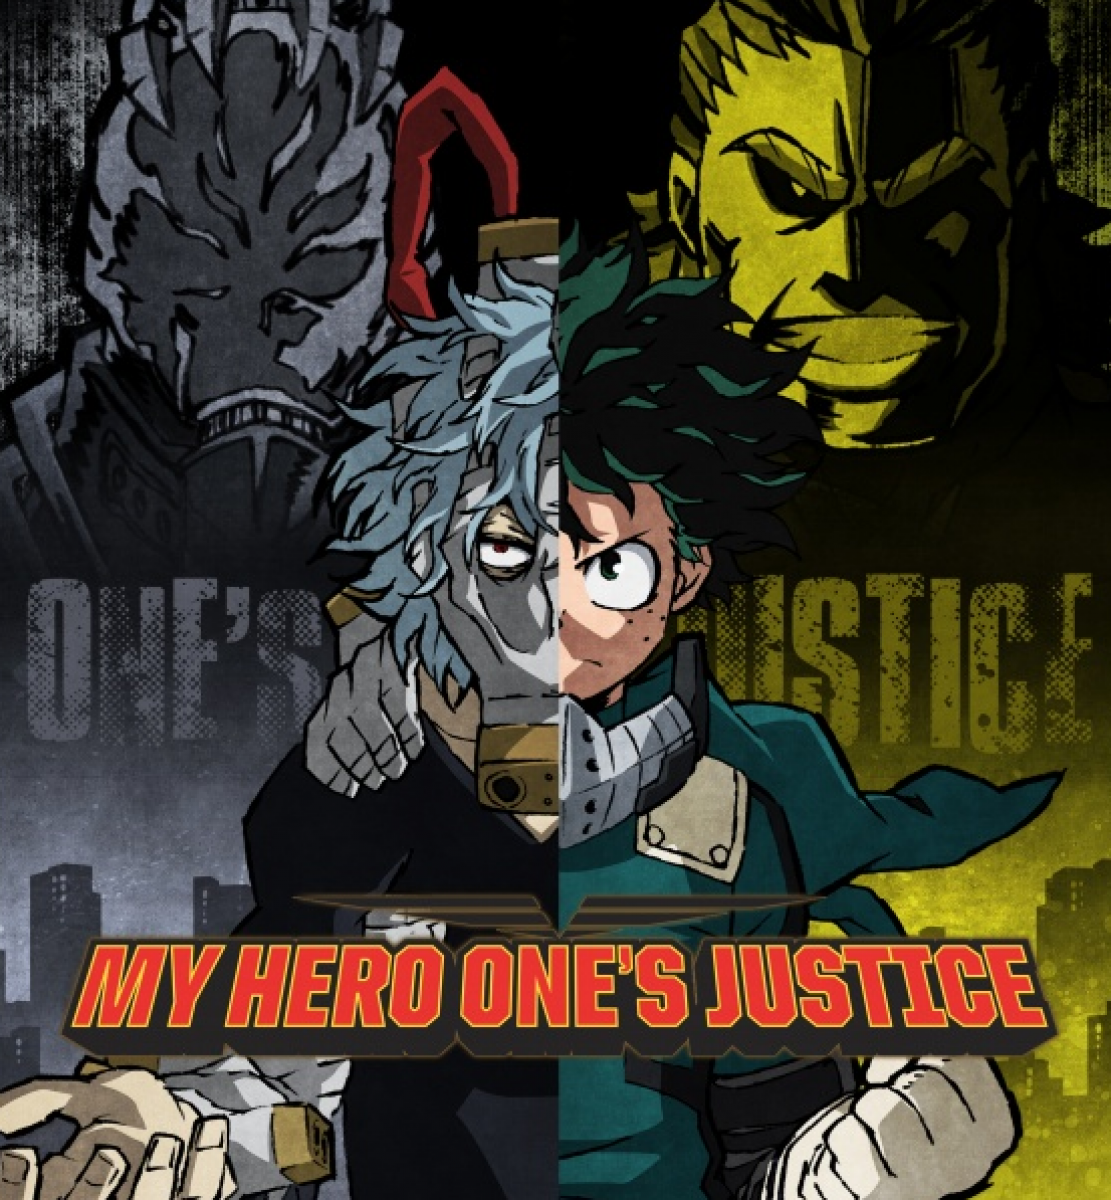 My Hero One's Justice' Review: Captures Anime's Heart, Not Execution